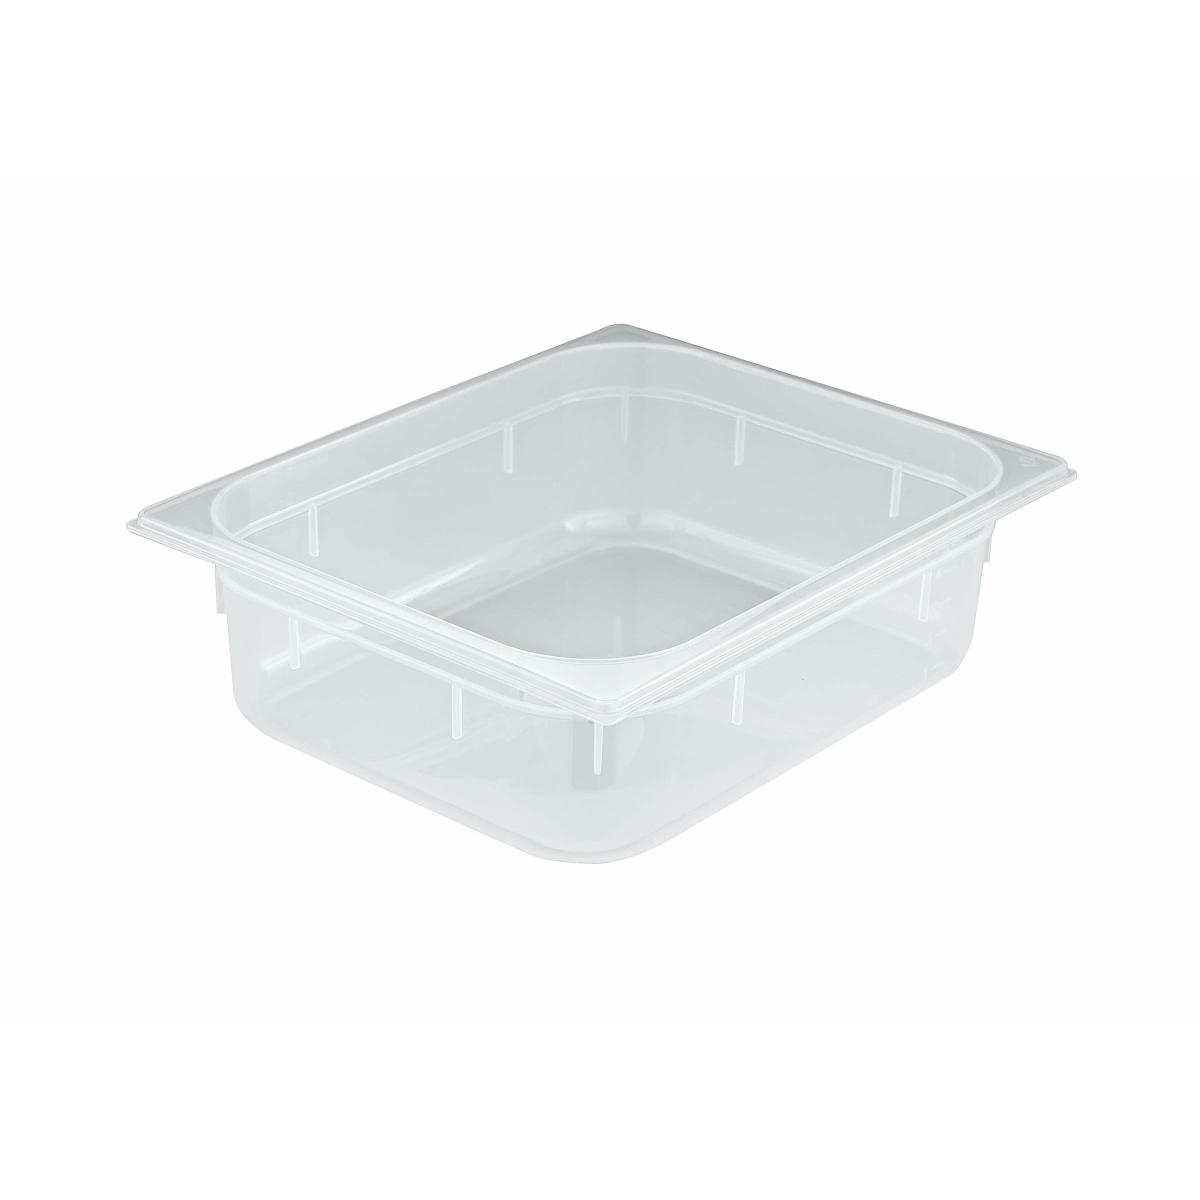 Bacinella gn 1 - 3 gastronorm pp cm 32,5x18x15